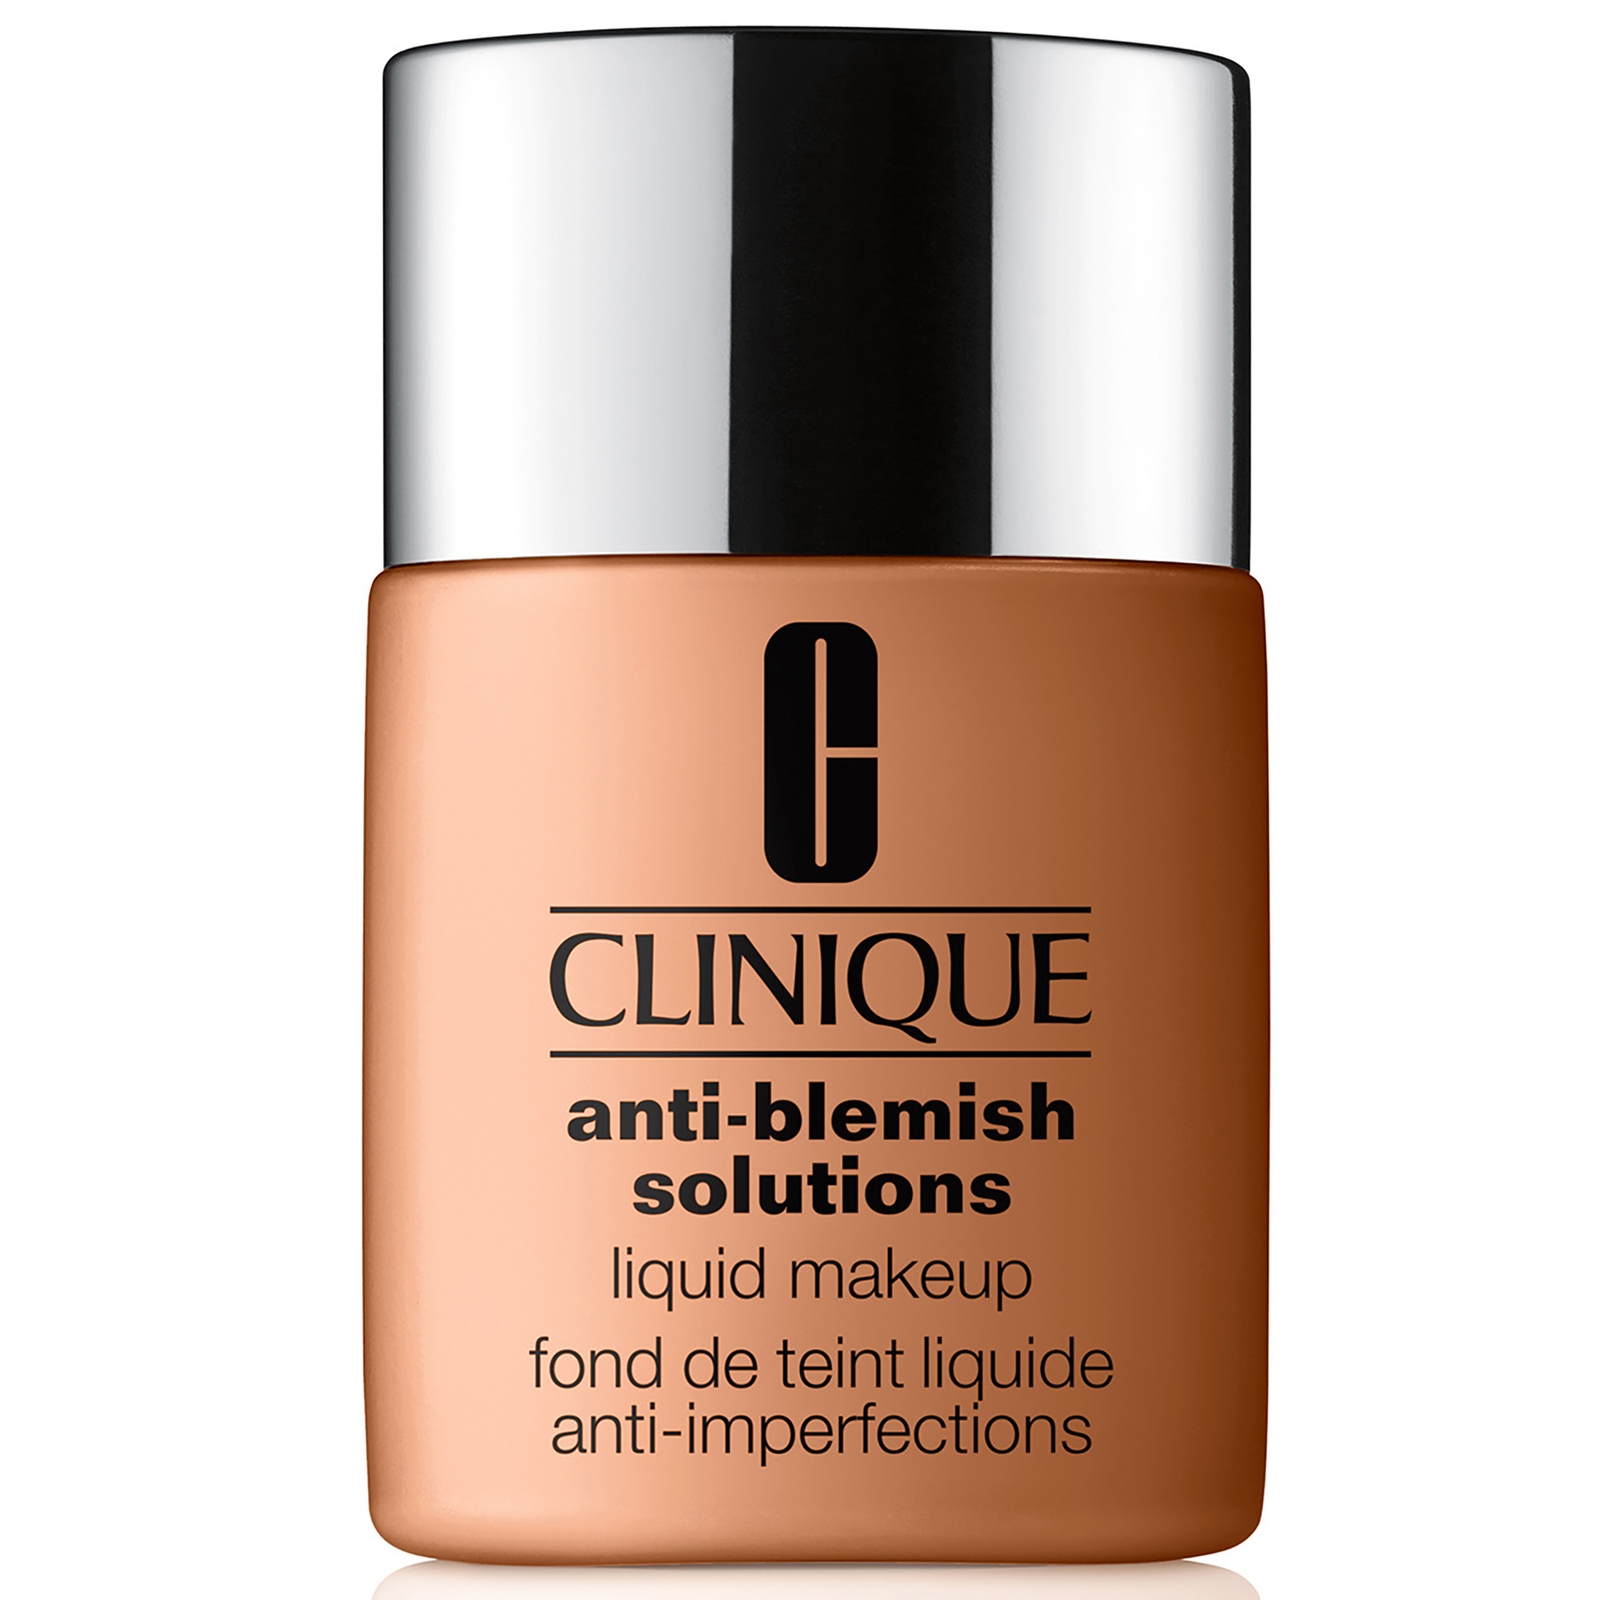 Image of Clinique Anti-Blemish Solutions Liquid Makeup with Salicylic Acid 30ml (Various Shades) - CN 74 Beige